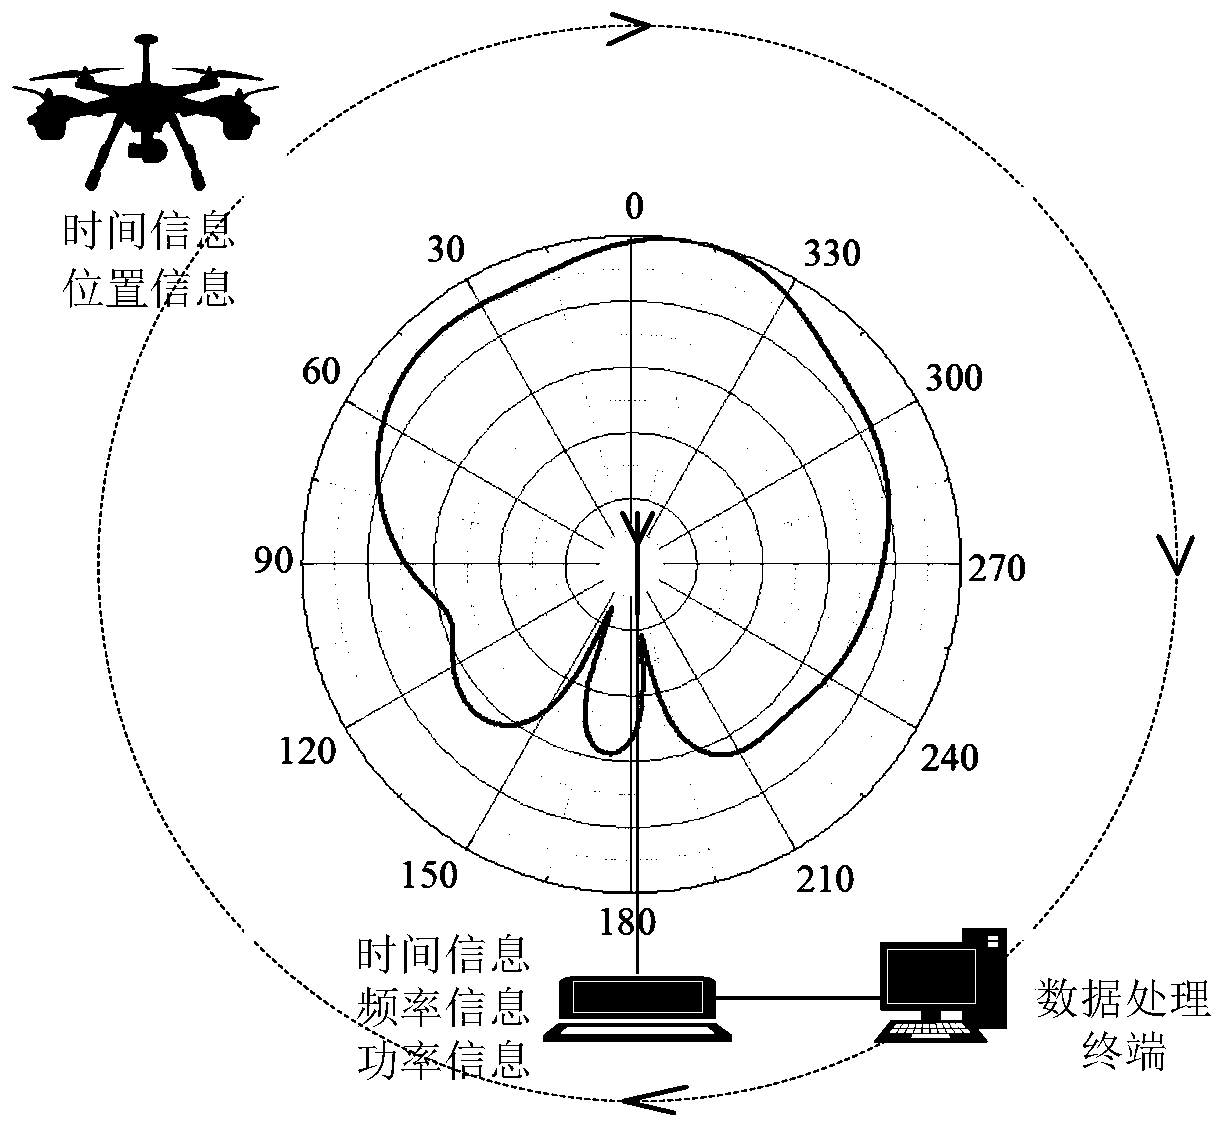 Large-scale antenna field directional diagram measuring system and method for multi-rotor unmanned aerial vehicles